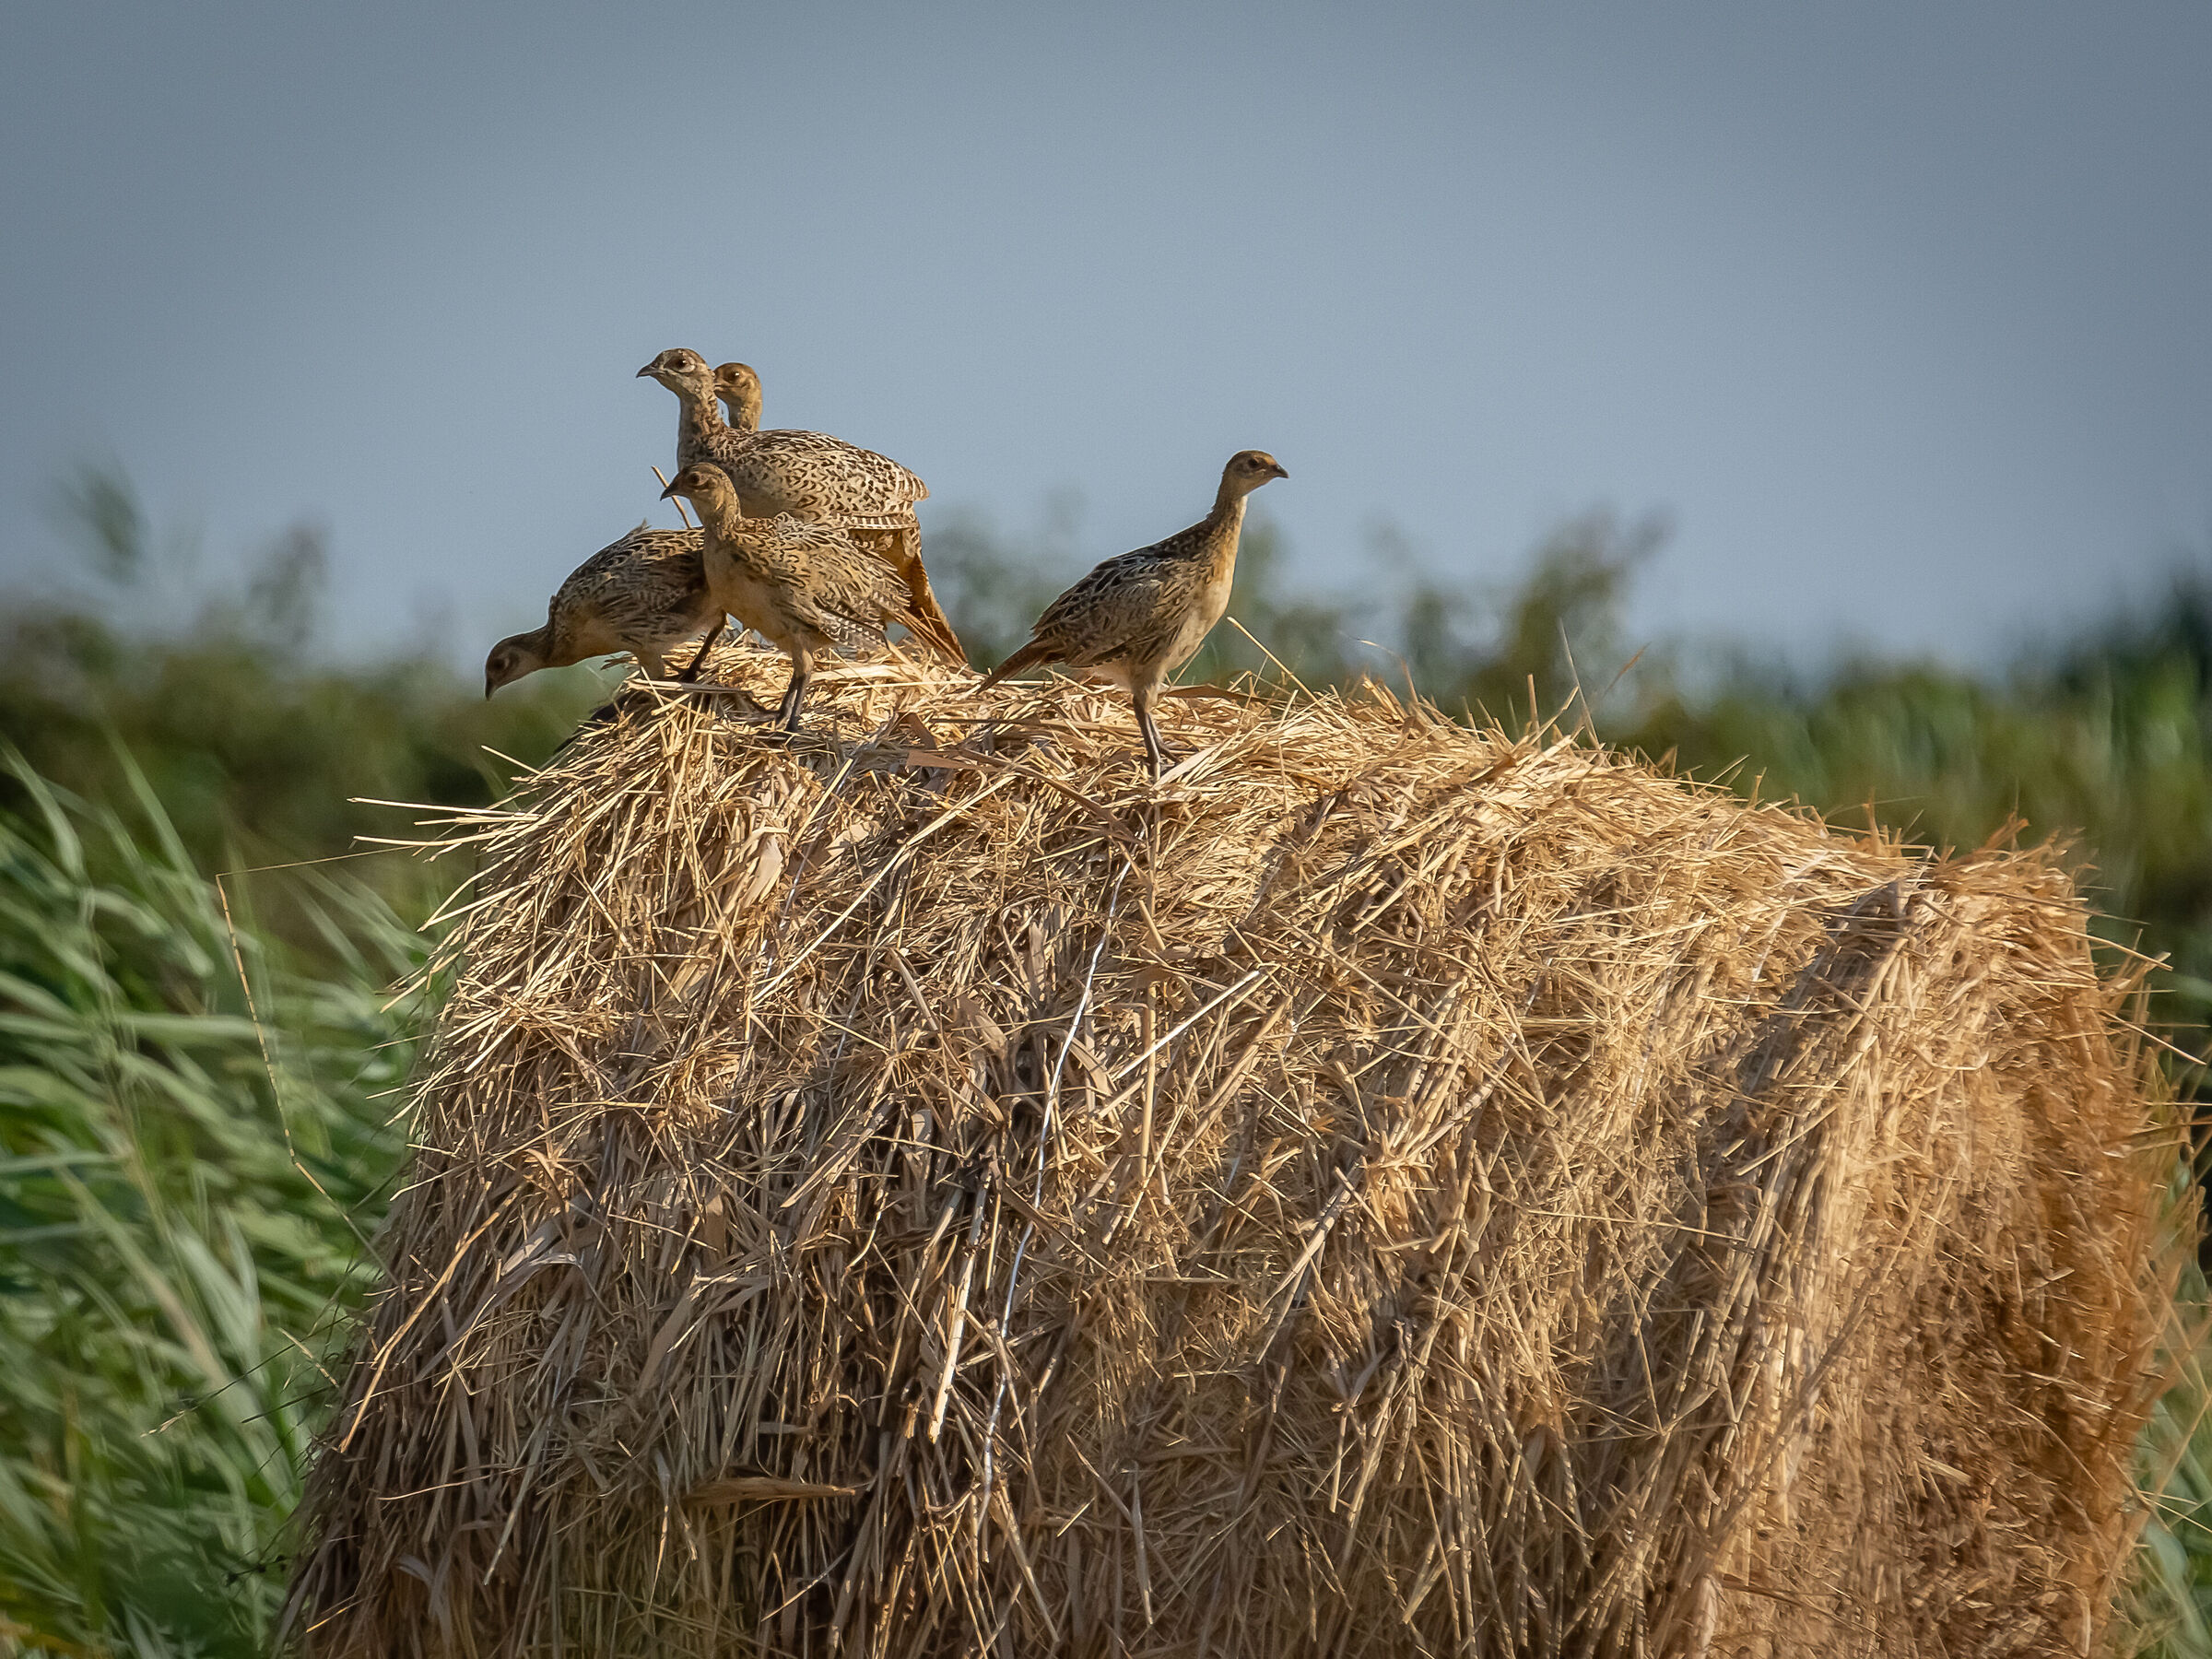 The bale of young pheasants....